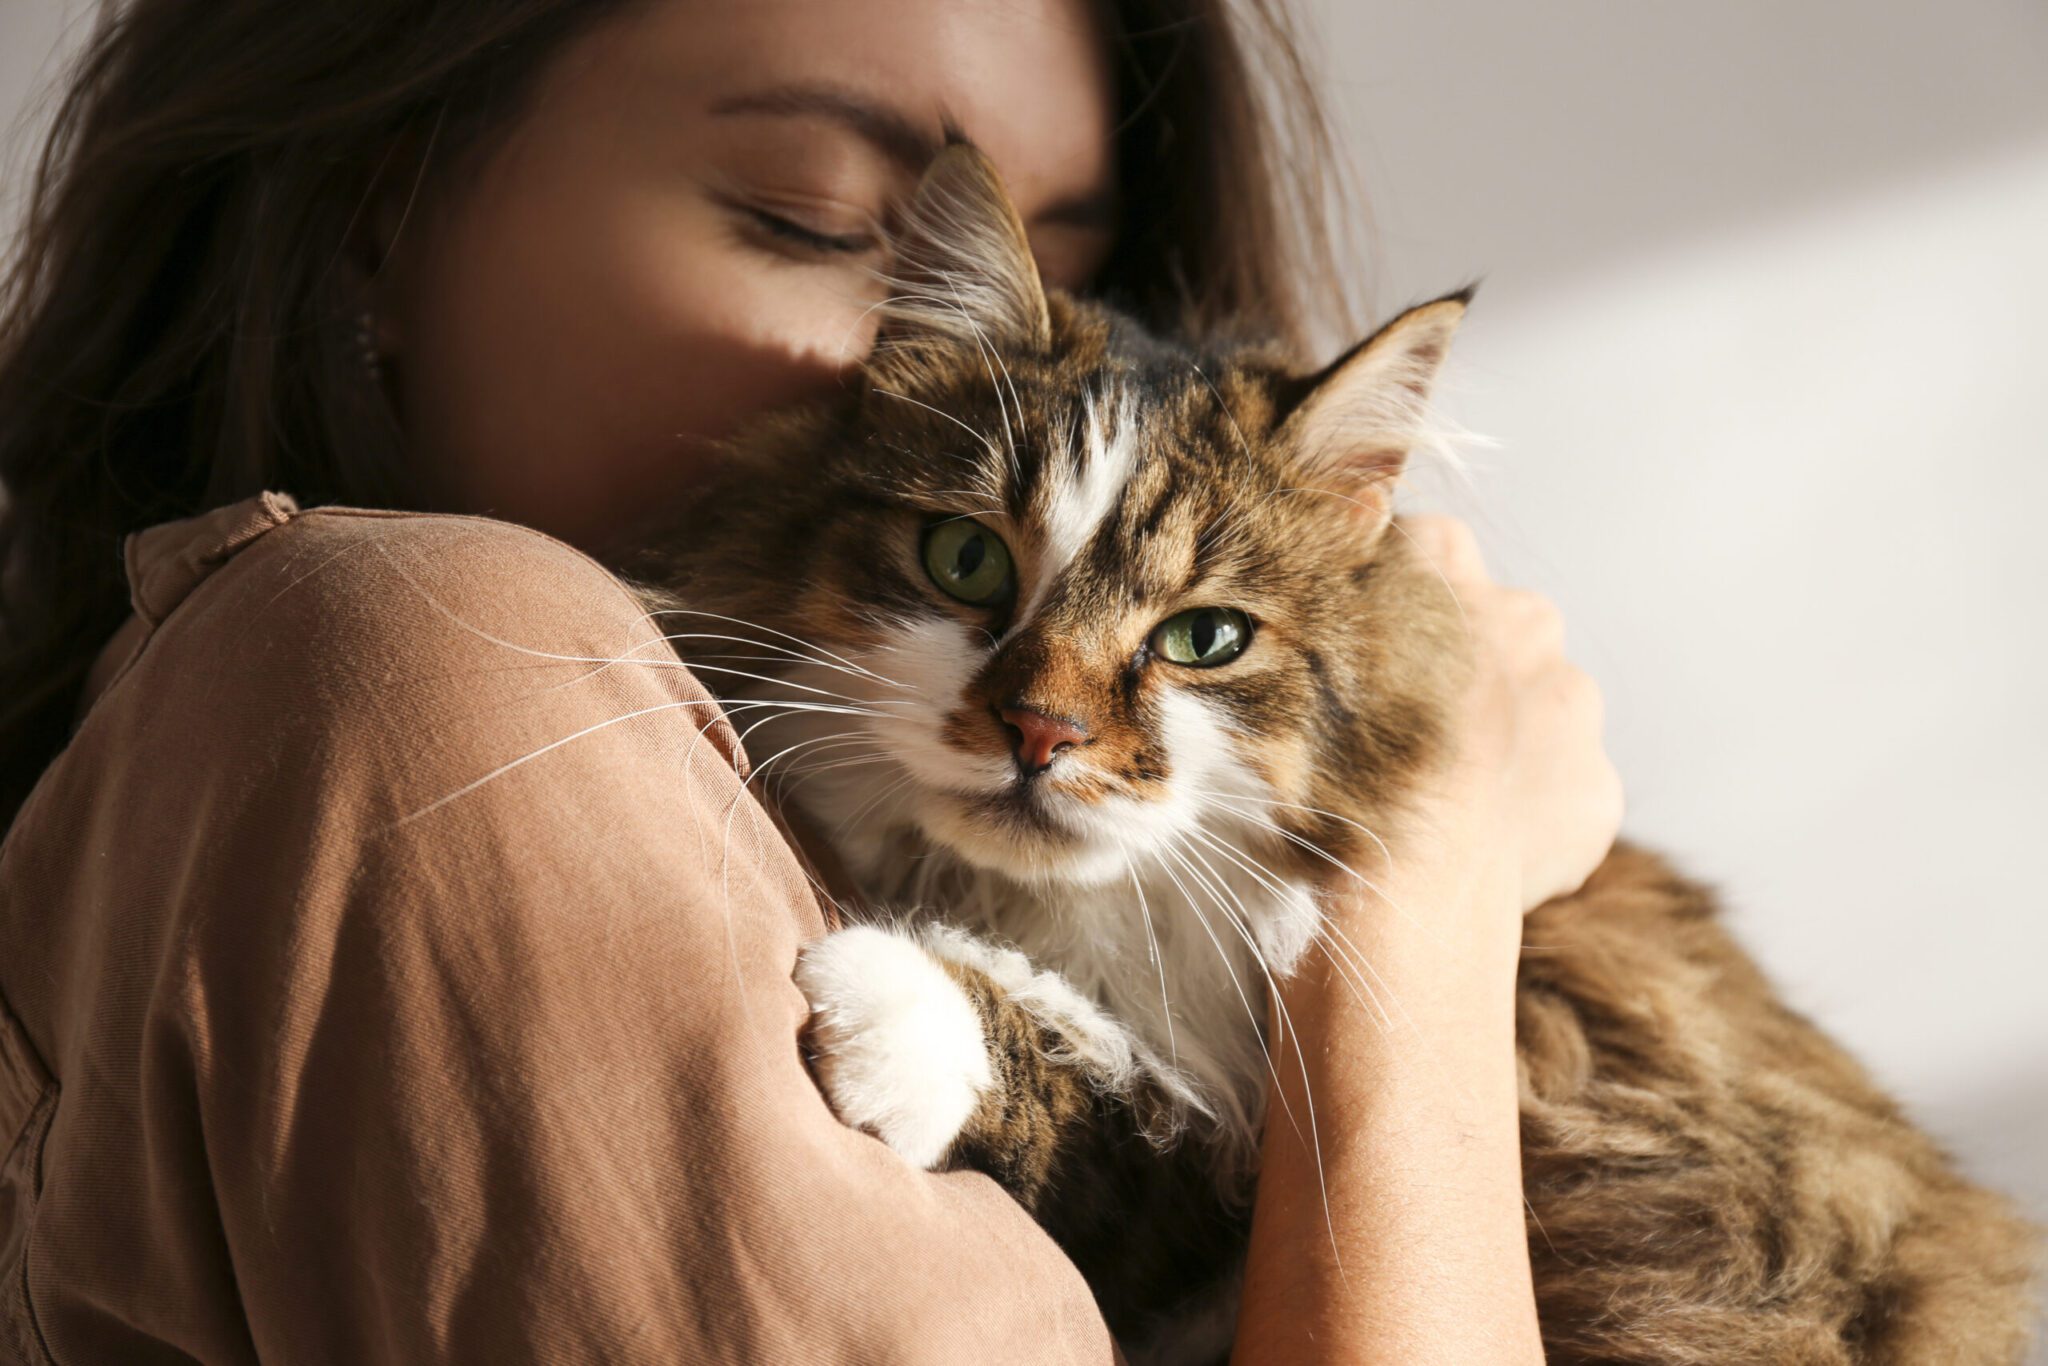 Portrait of young woman holding cute siberian cat with green eyes. Female hugging her cute long hair kitty. Background, copy space, close up. Adorable domestic pet concept.